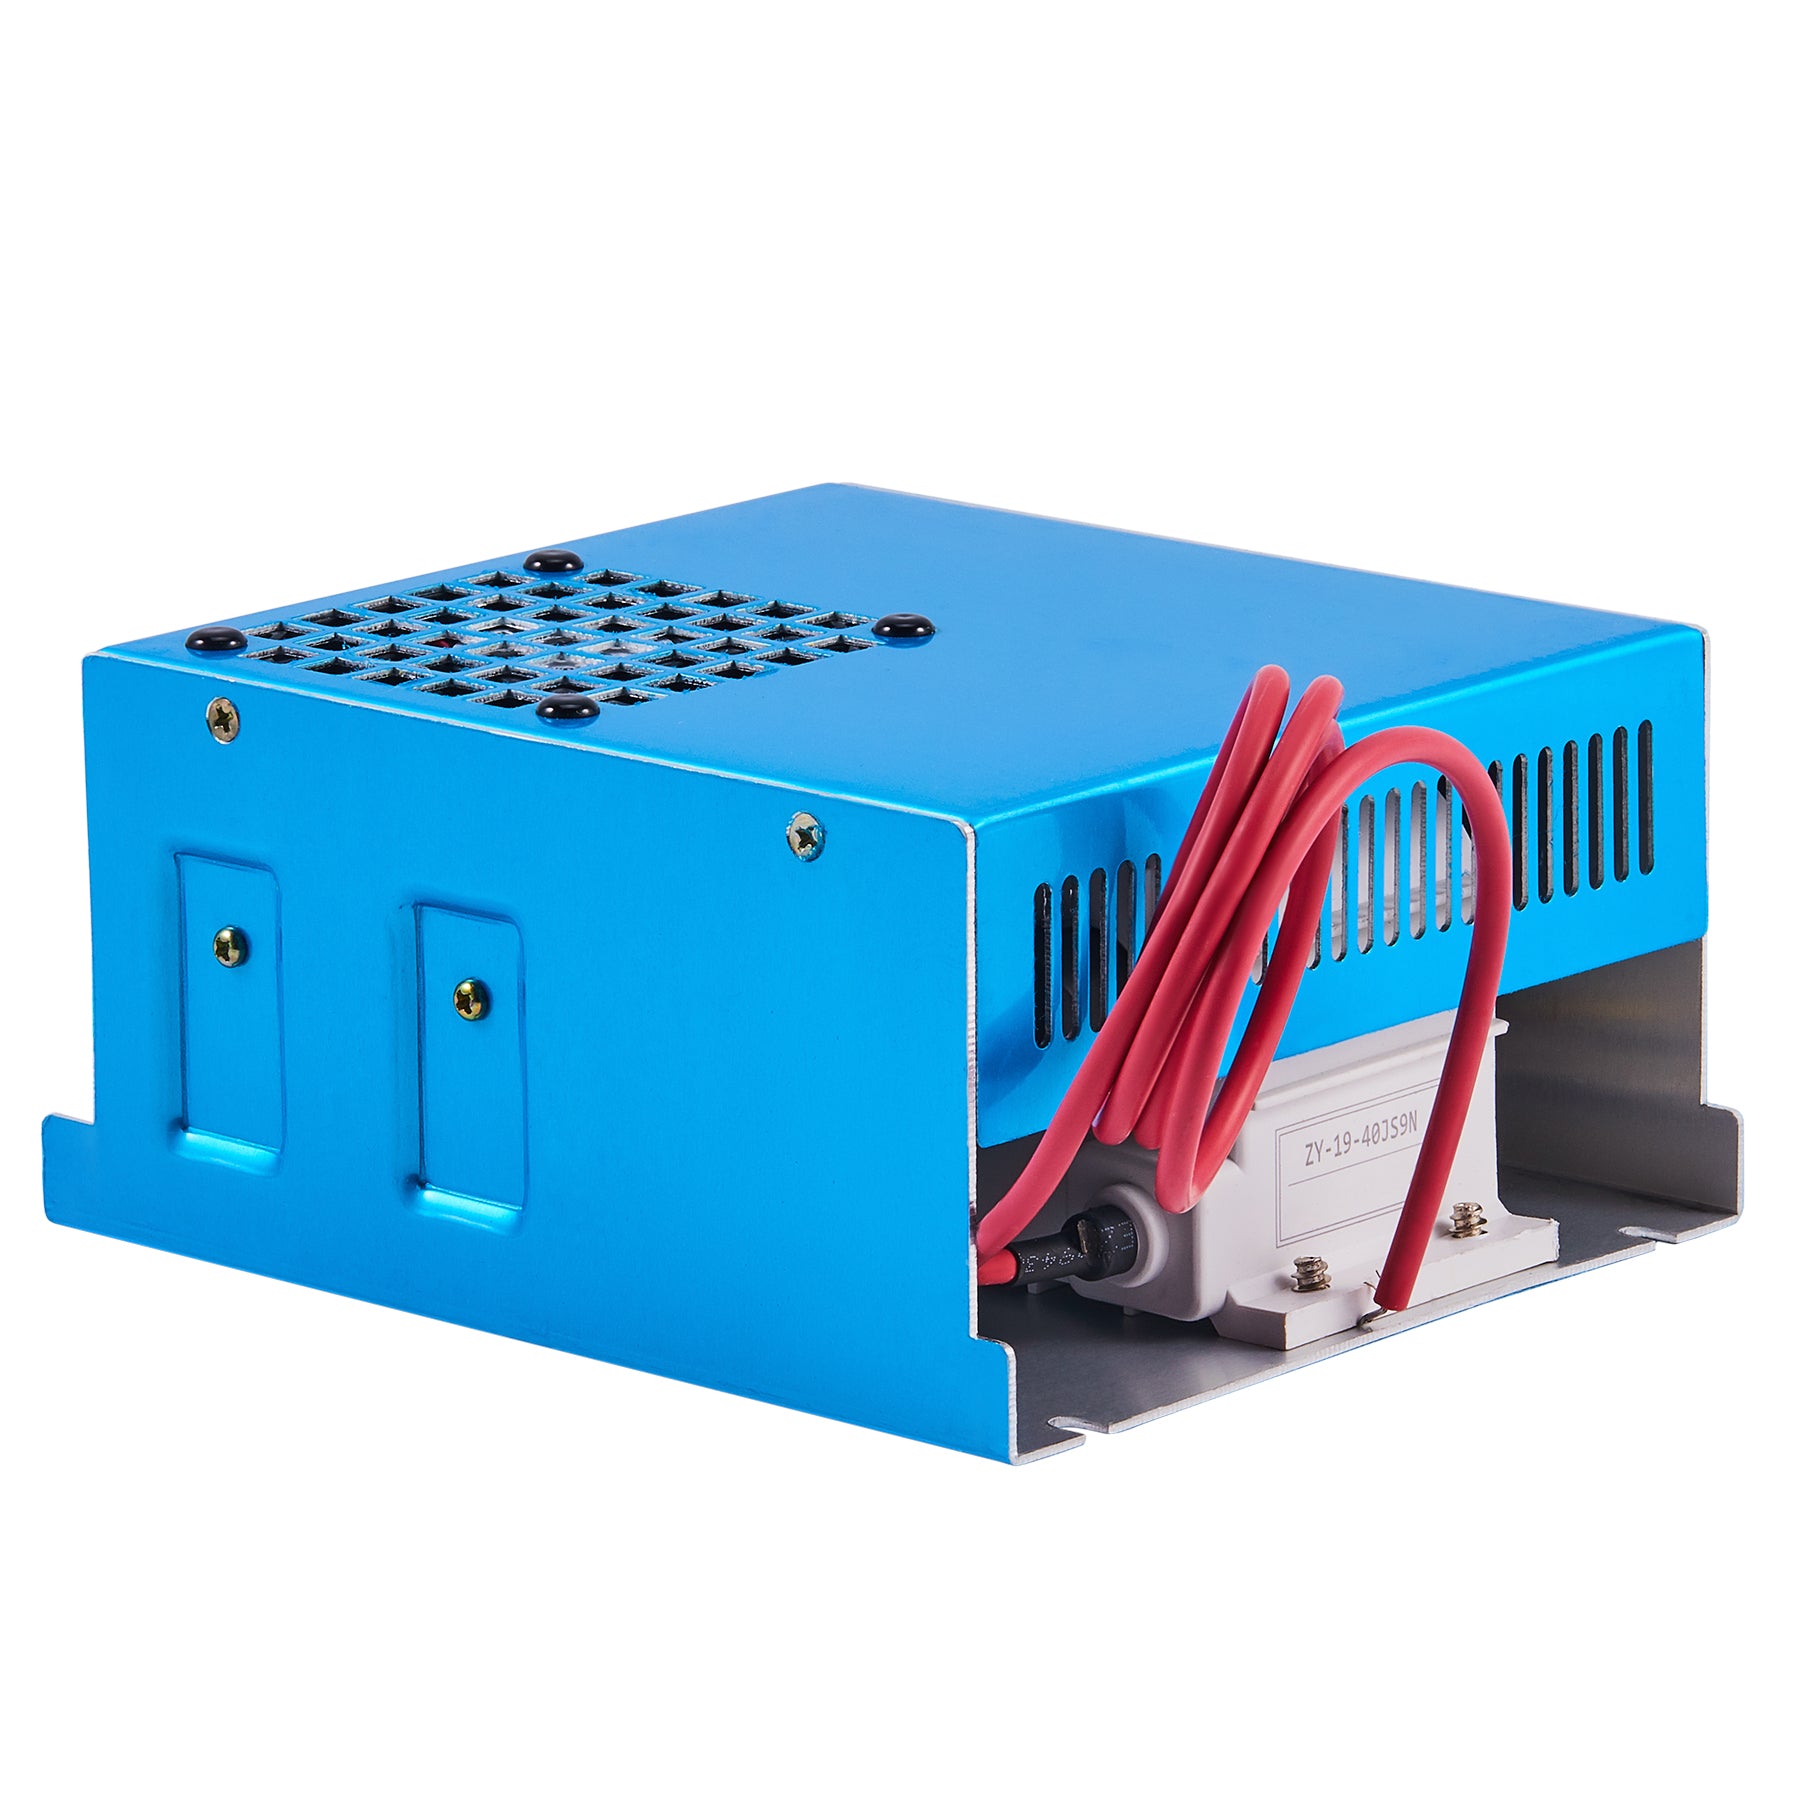 50W Laser Power Supply for CO2 Laser Engraver Cutting Machine | LN-50